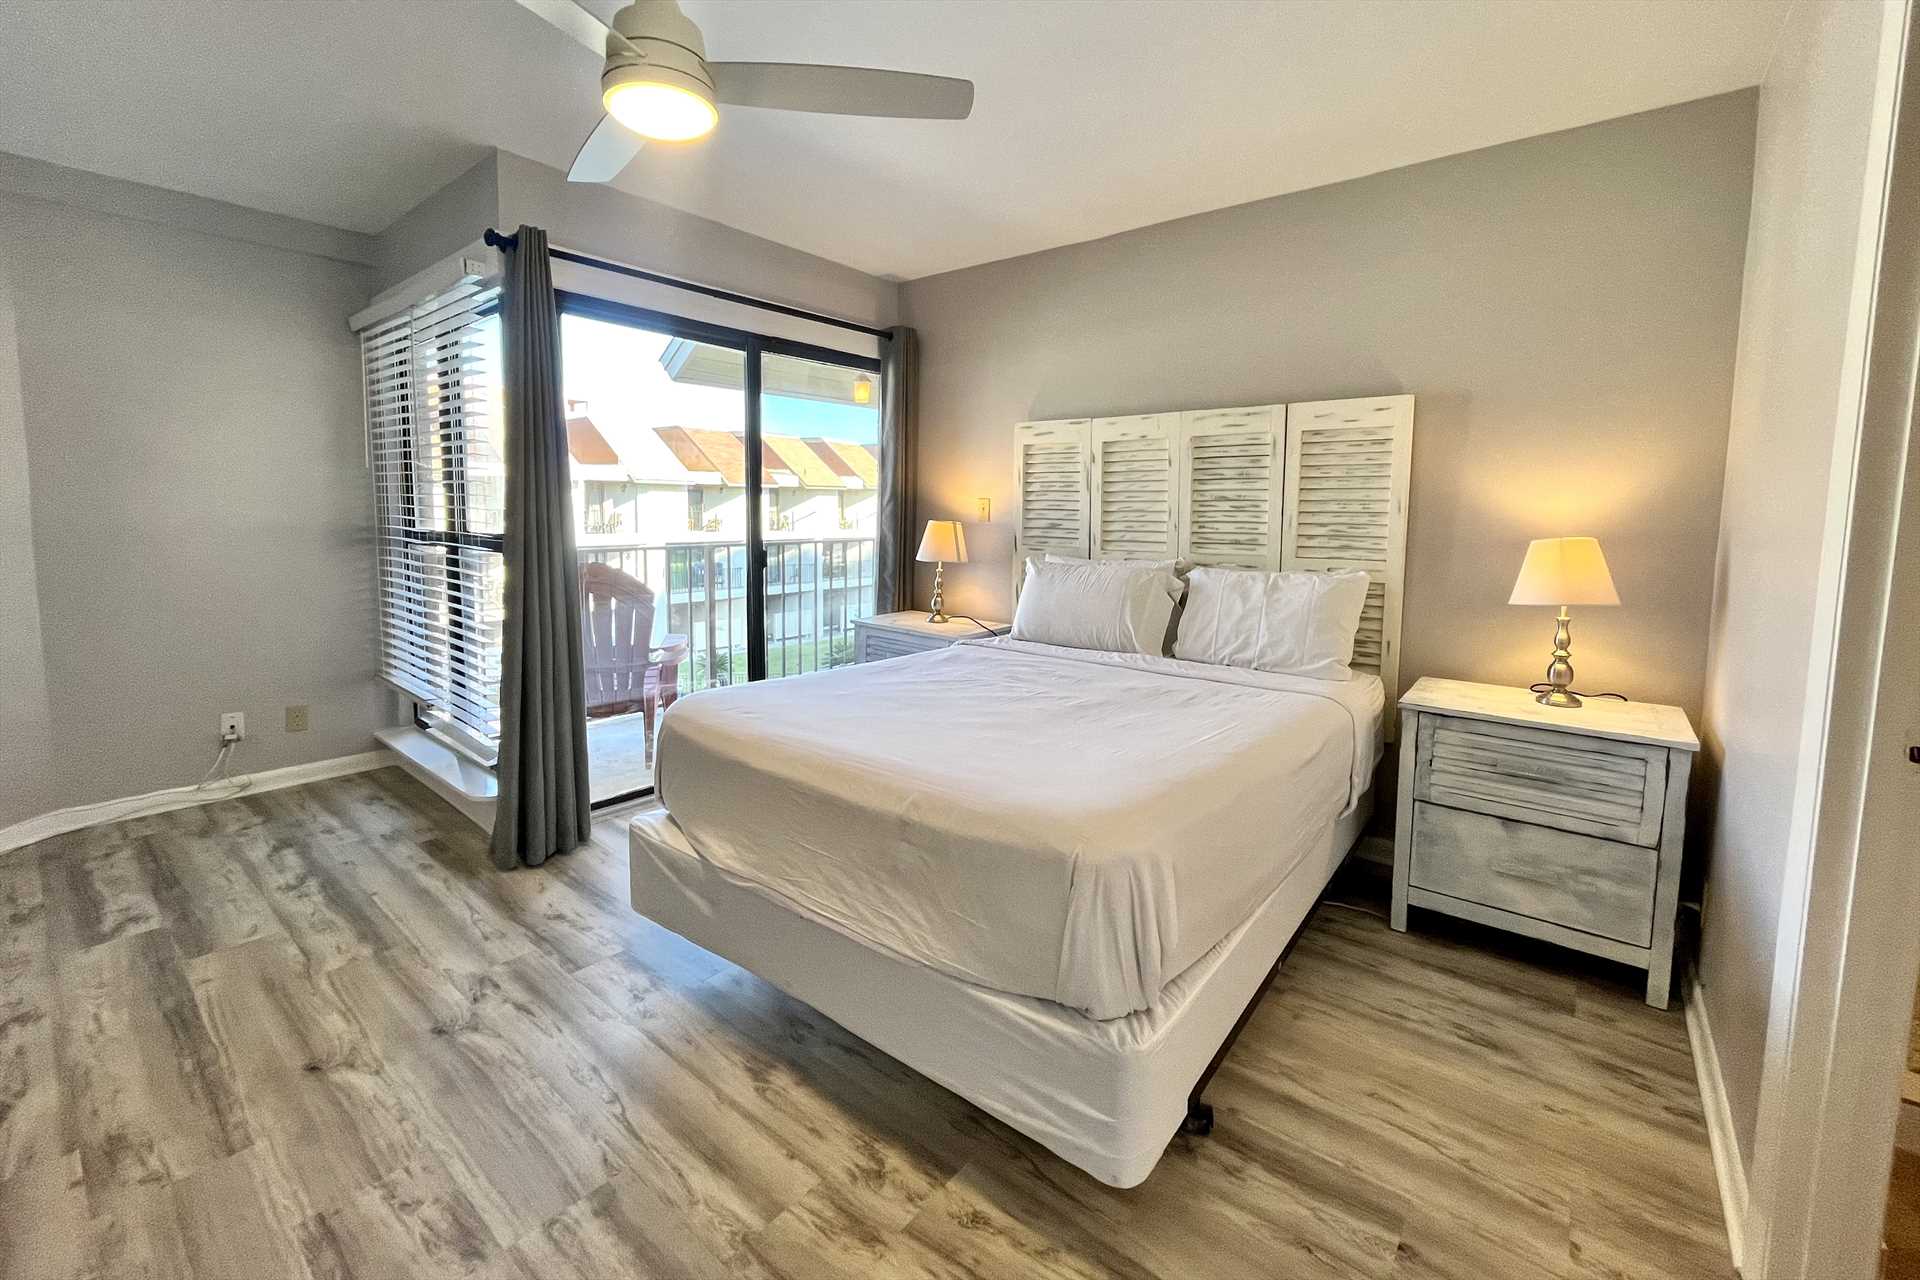 Master bedroom - Queen and private bathroom